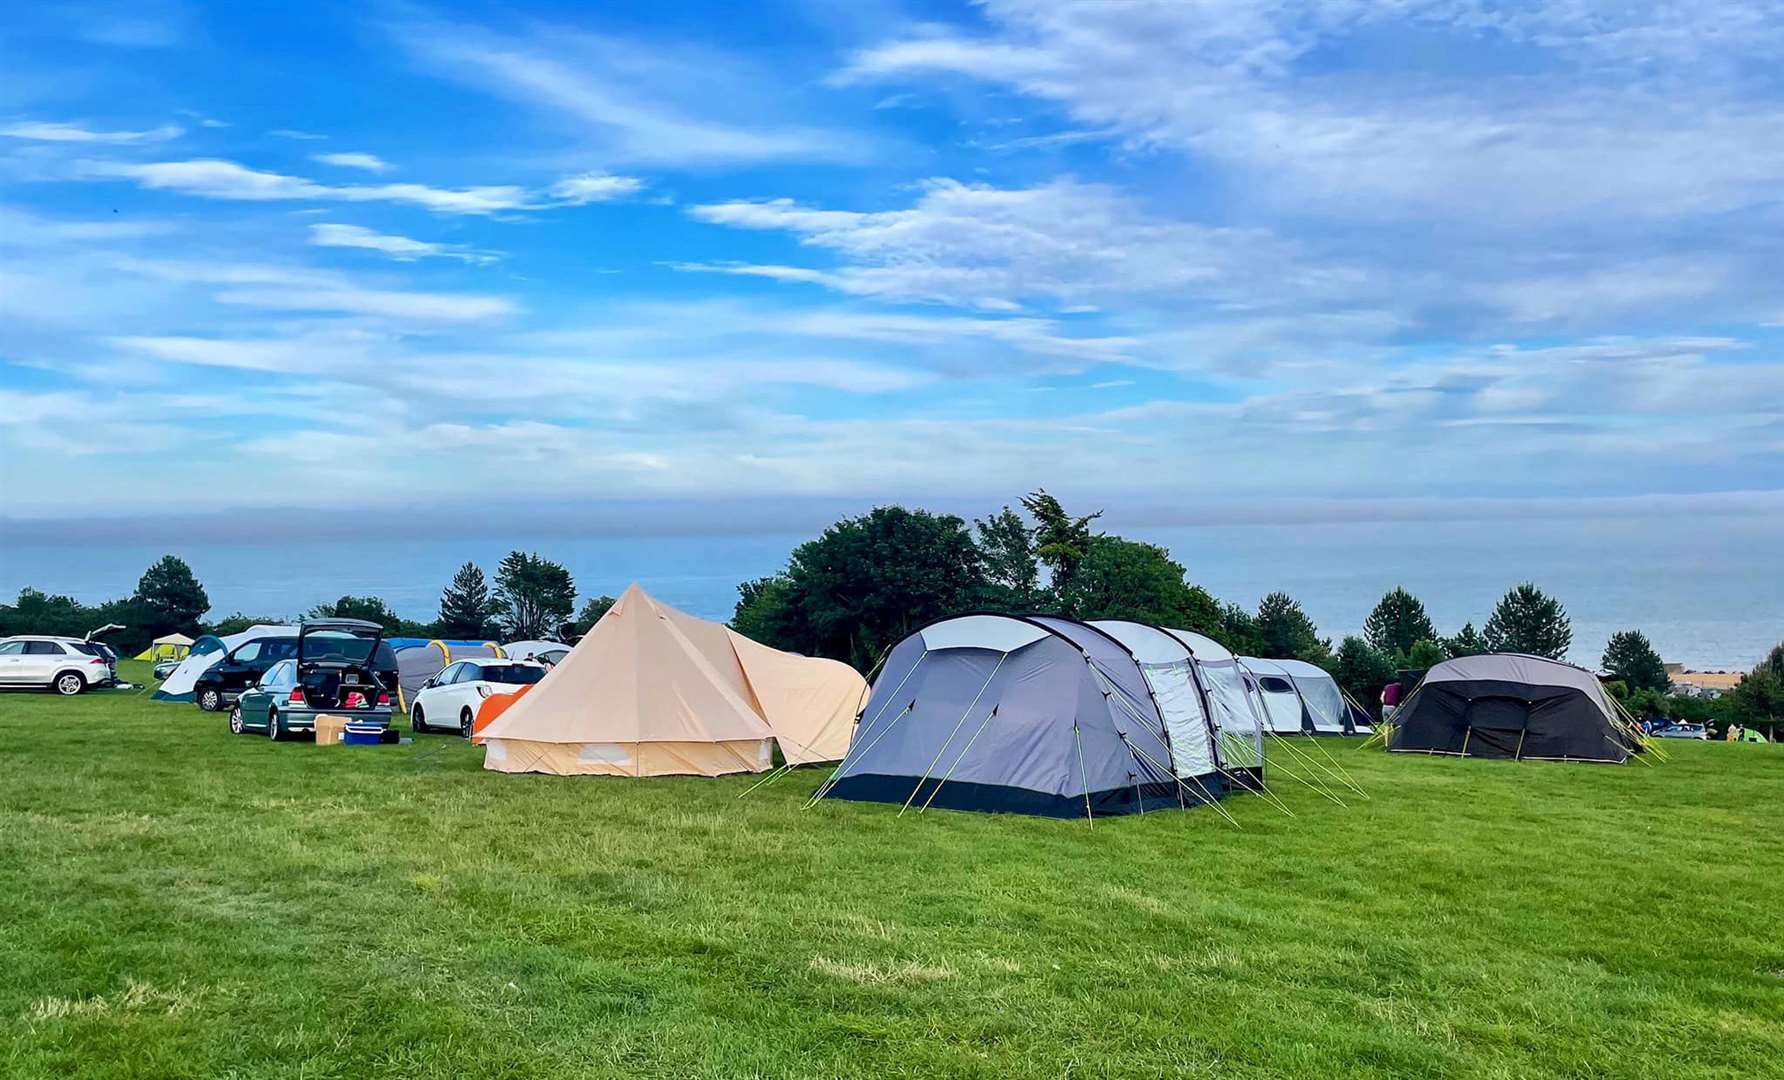 The campsite in Kingsdown is close to the seafront and it’s a pleasant walk along the beach to Deal. Picture: Facebook / Kingsdown Camping